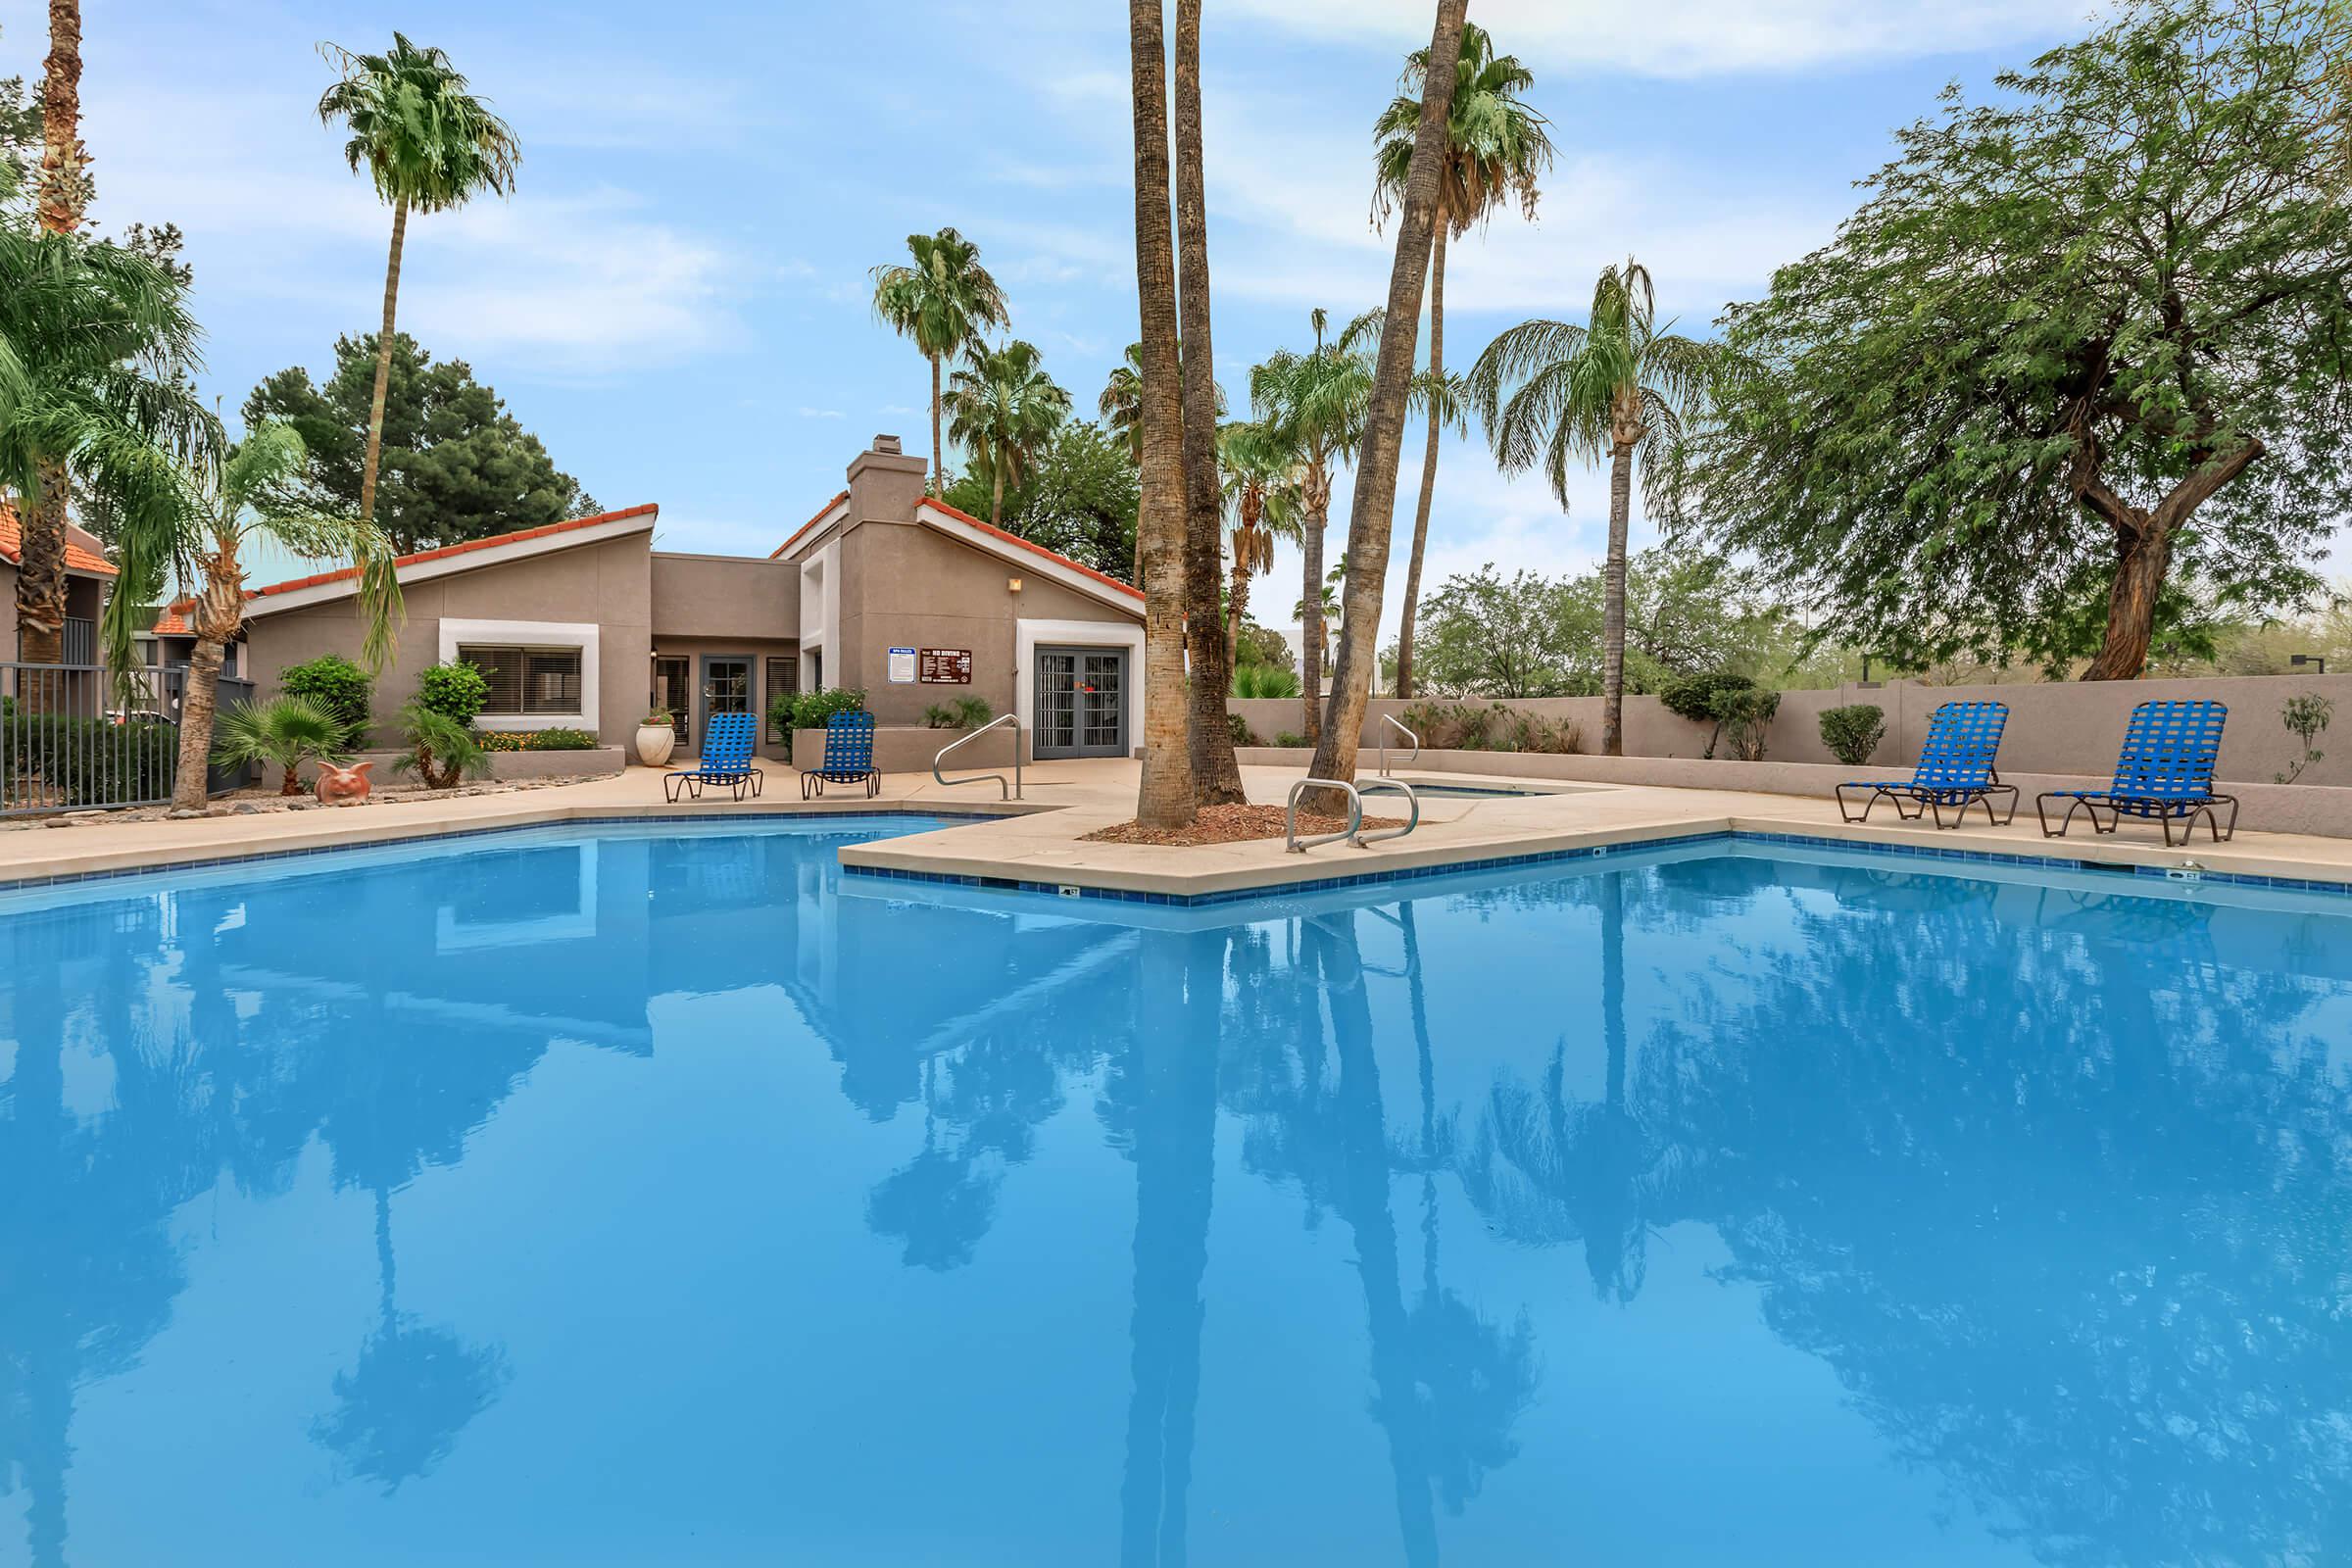 a pool next to a palm tree in front of a house